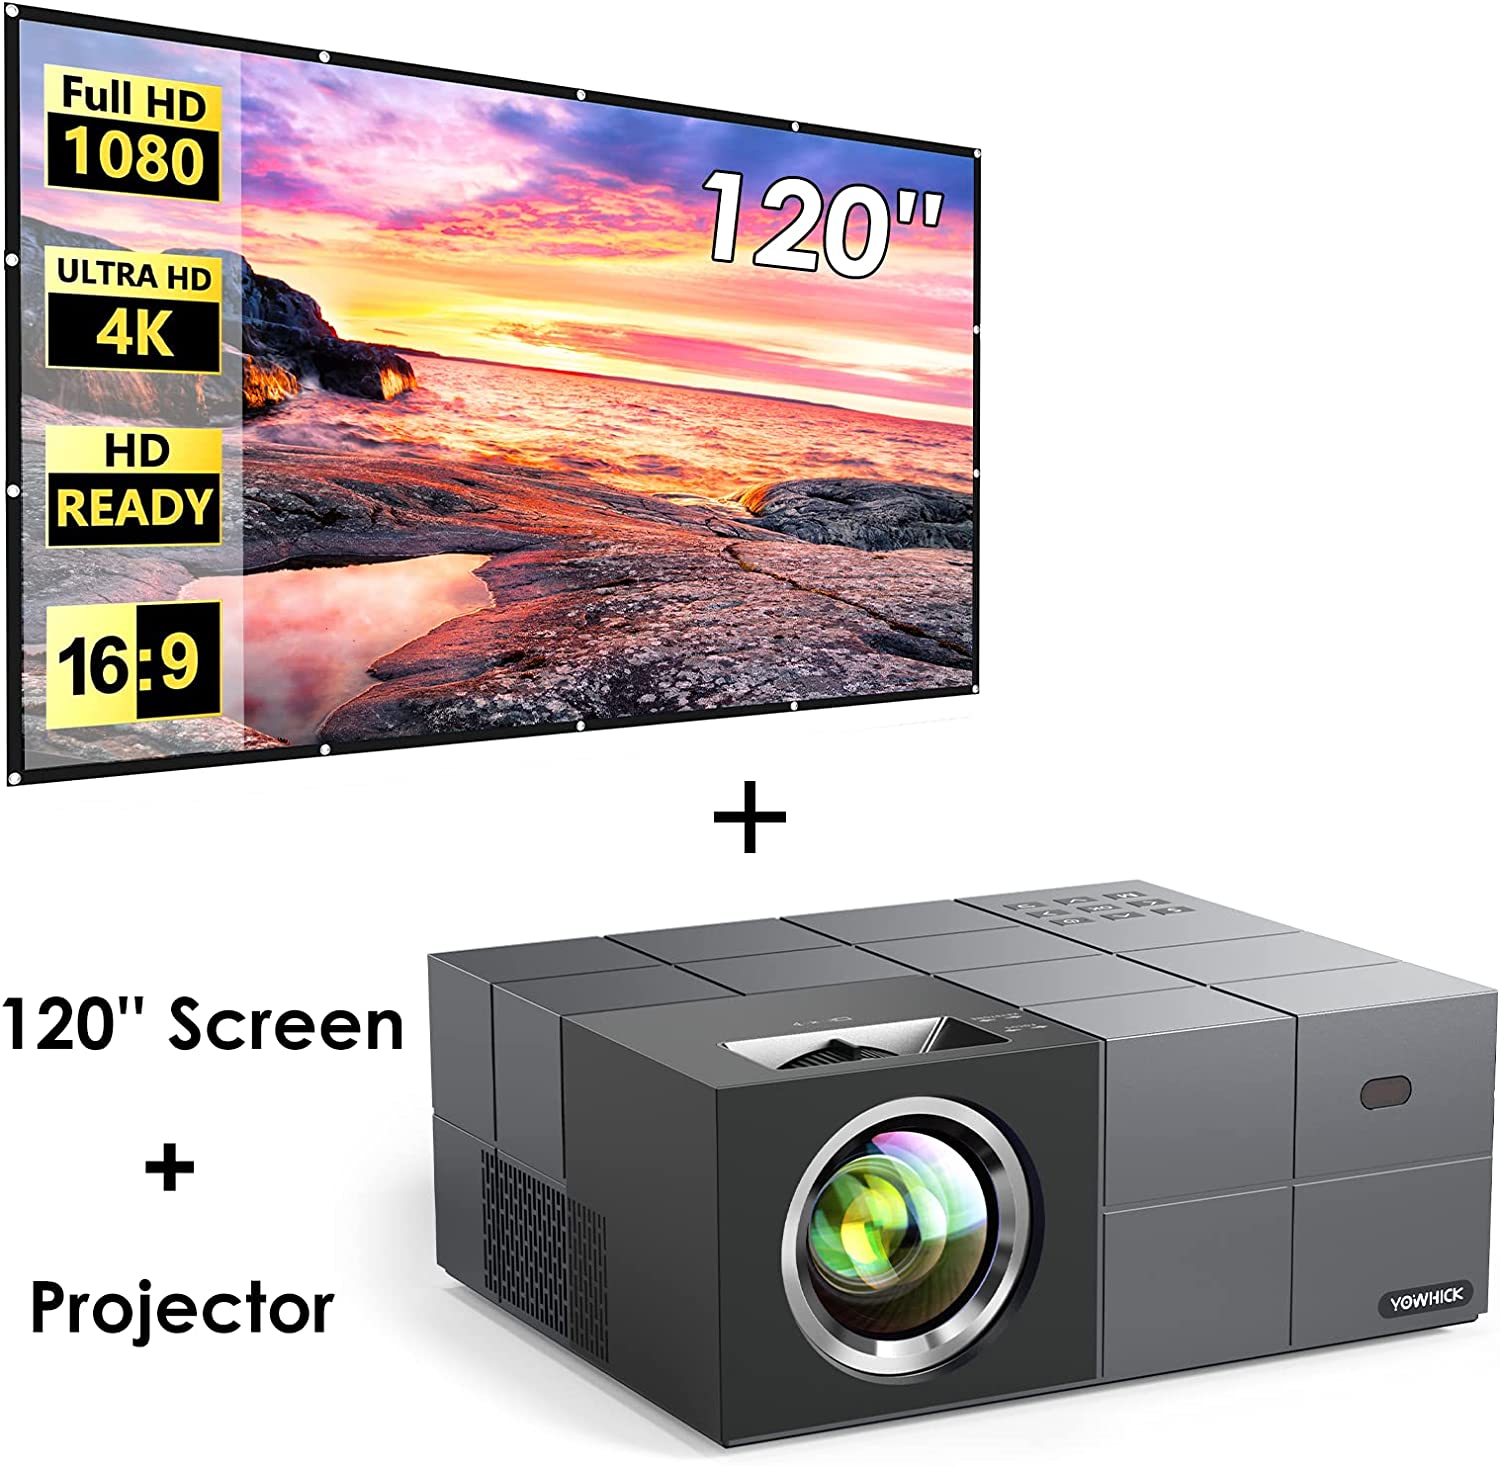 Native 1080P 5G WiFi Bluetooth Projector 4K Support, GDP1G Outdoor Projector Grey - YOWHICK